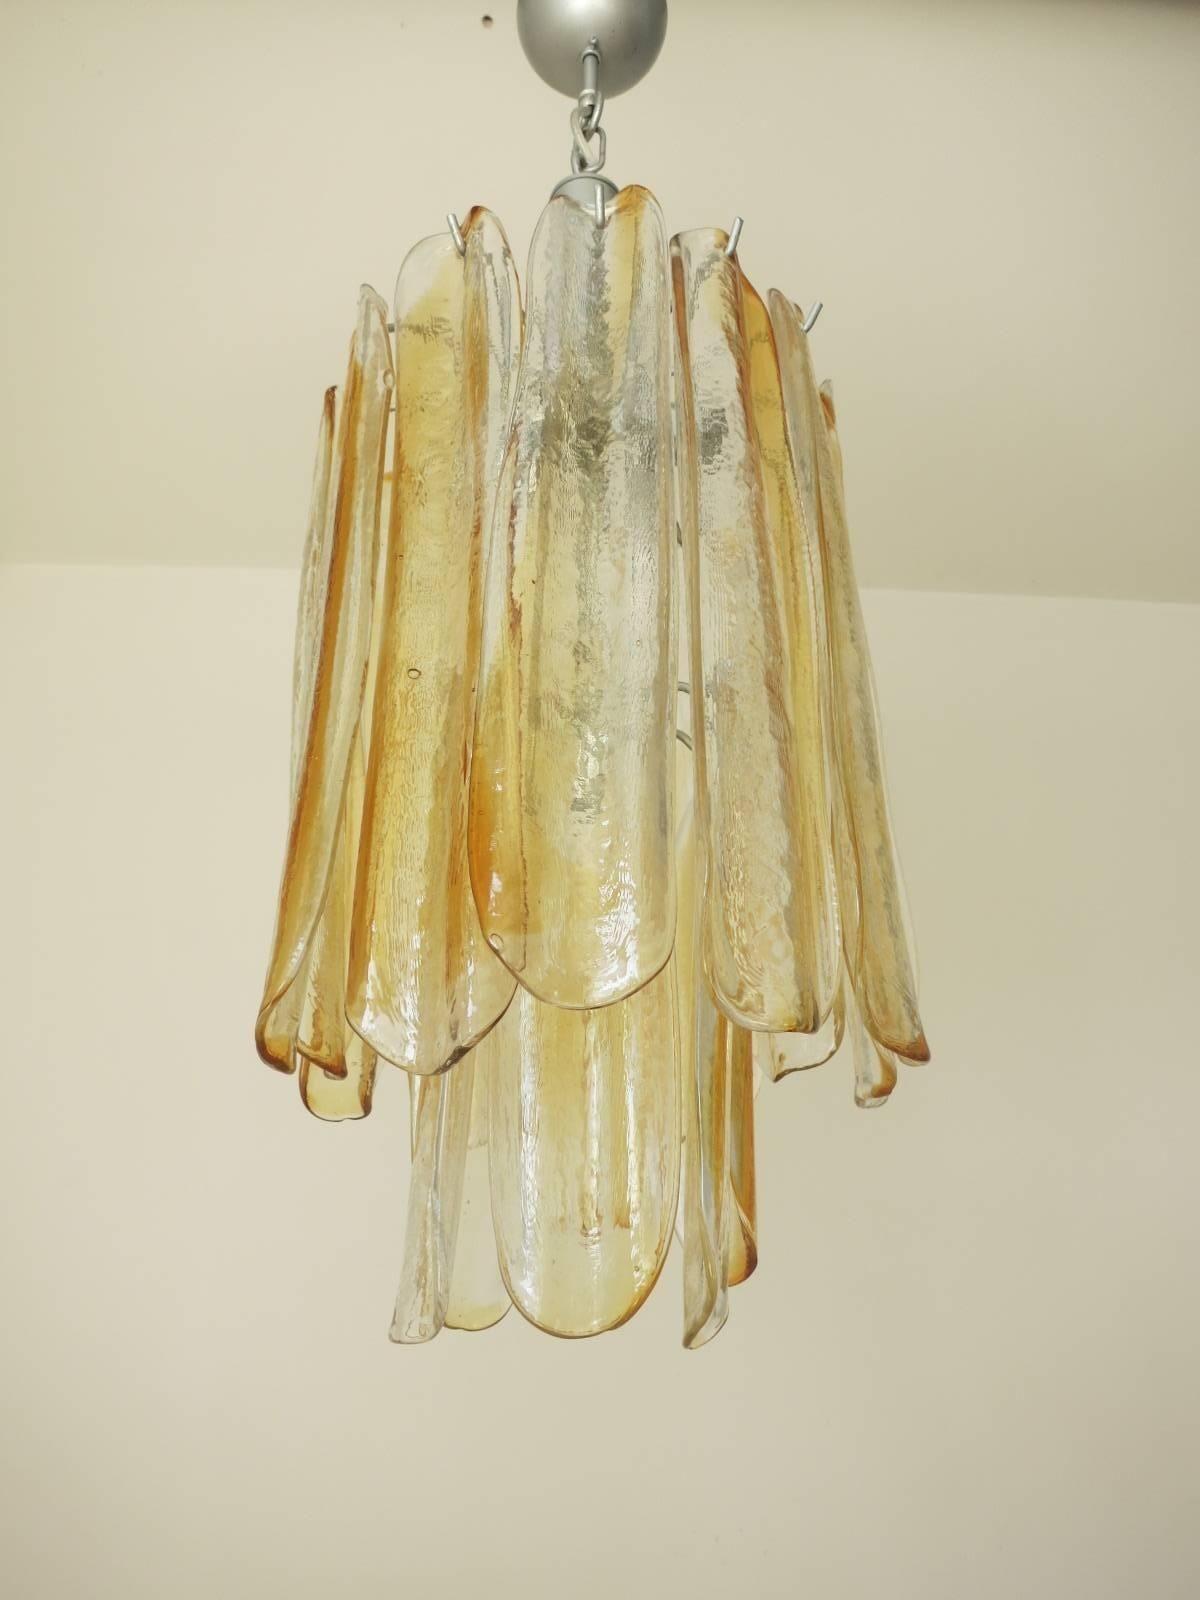 Vintage Italian Chandelier w/ Amber & Clear Murano Glass by Mazzega In Good Condition For Sale In Los Angeles, CA